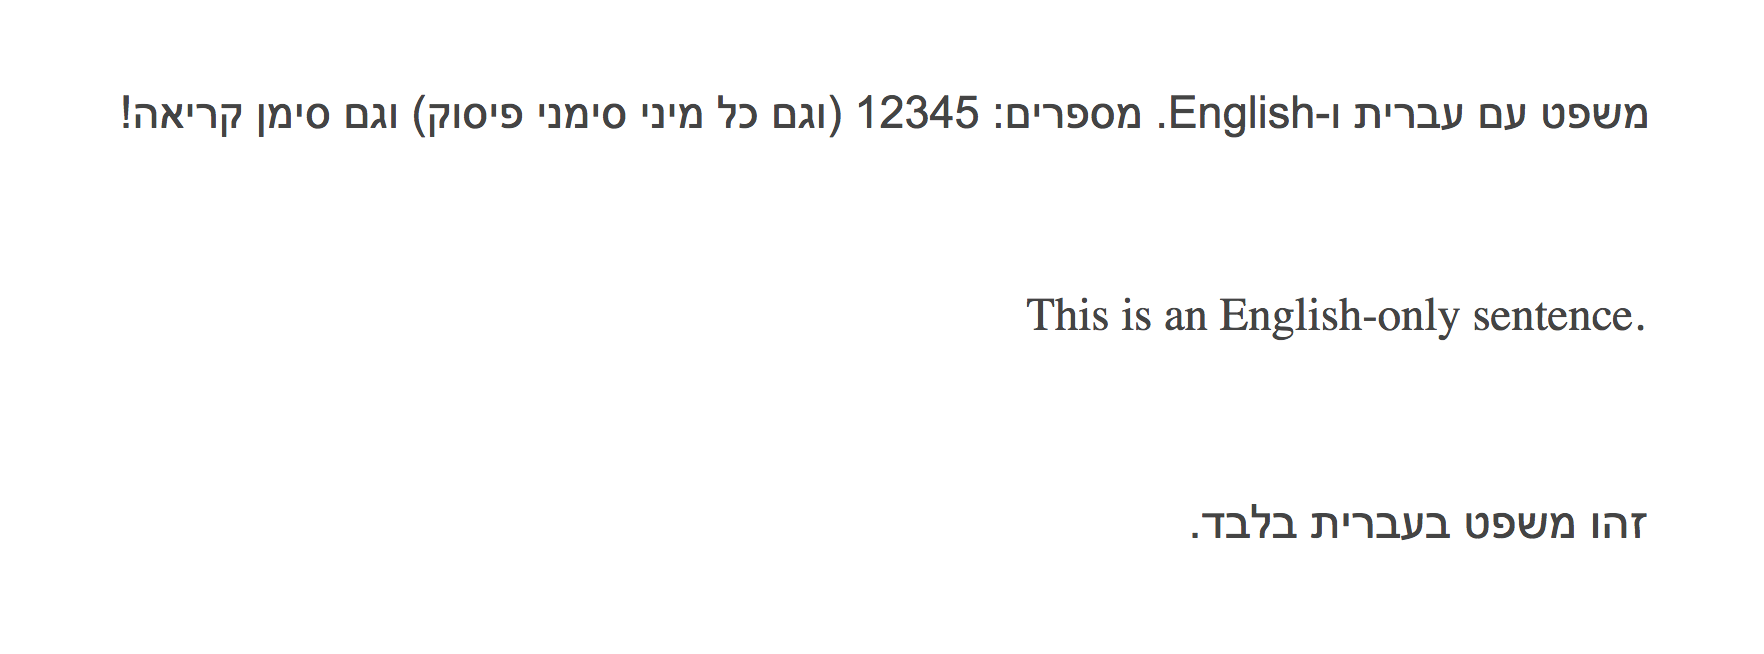 Hebrew and English